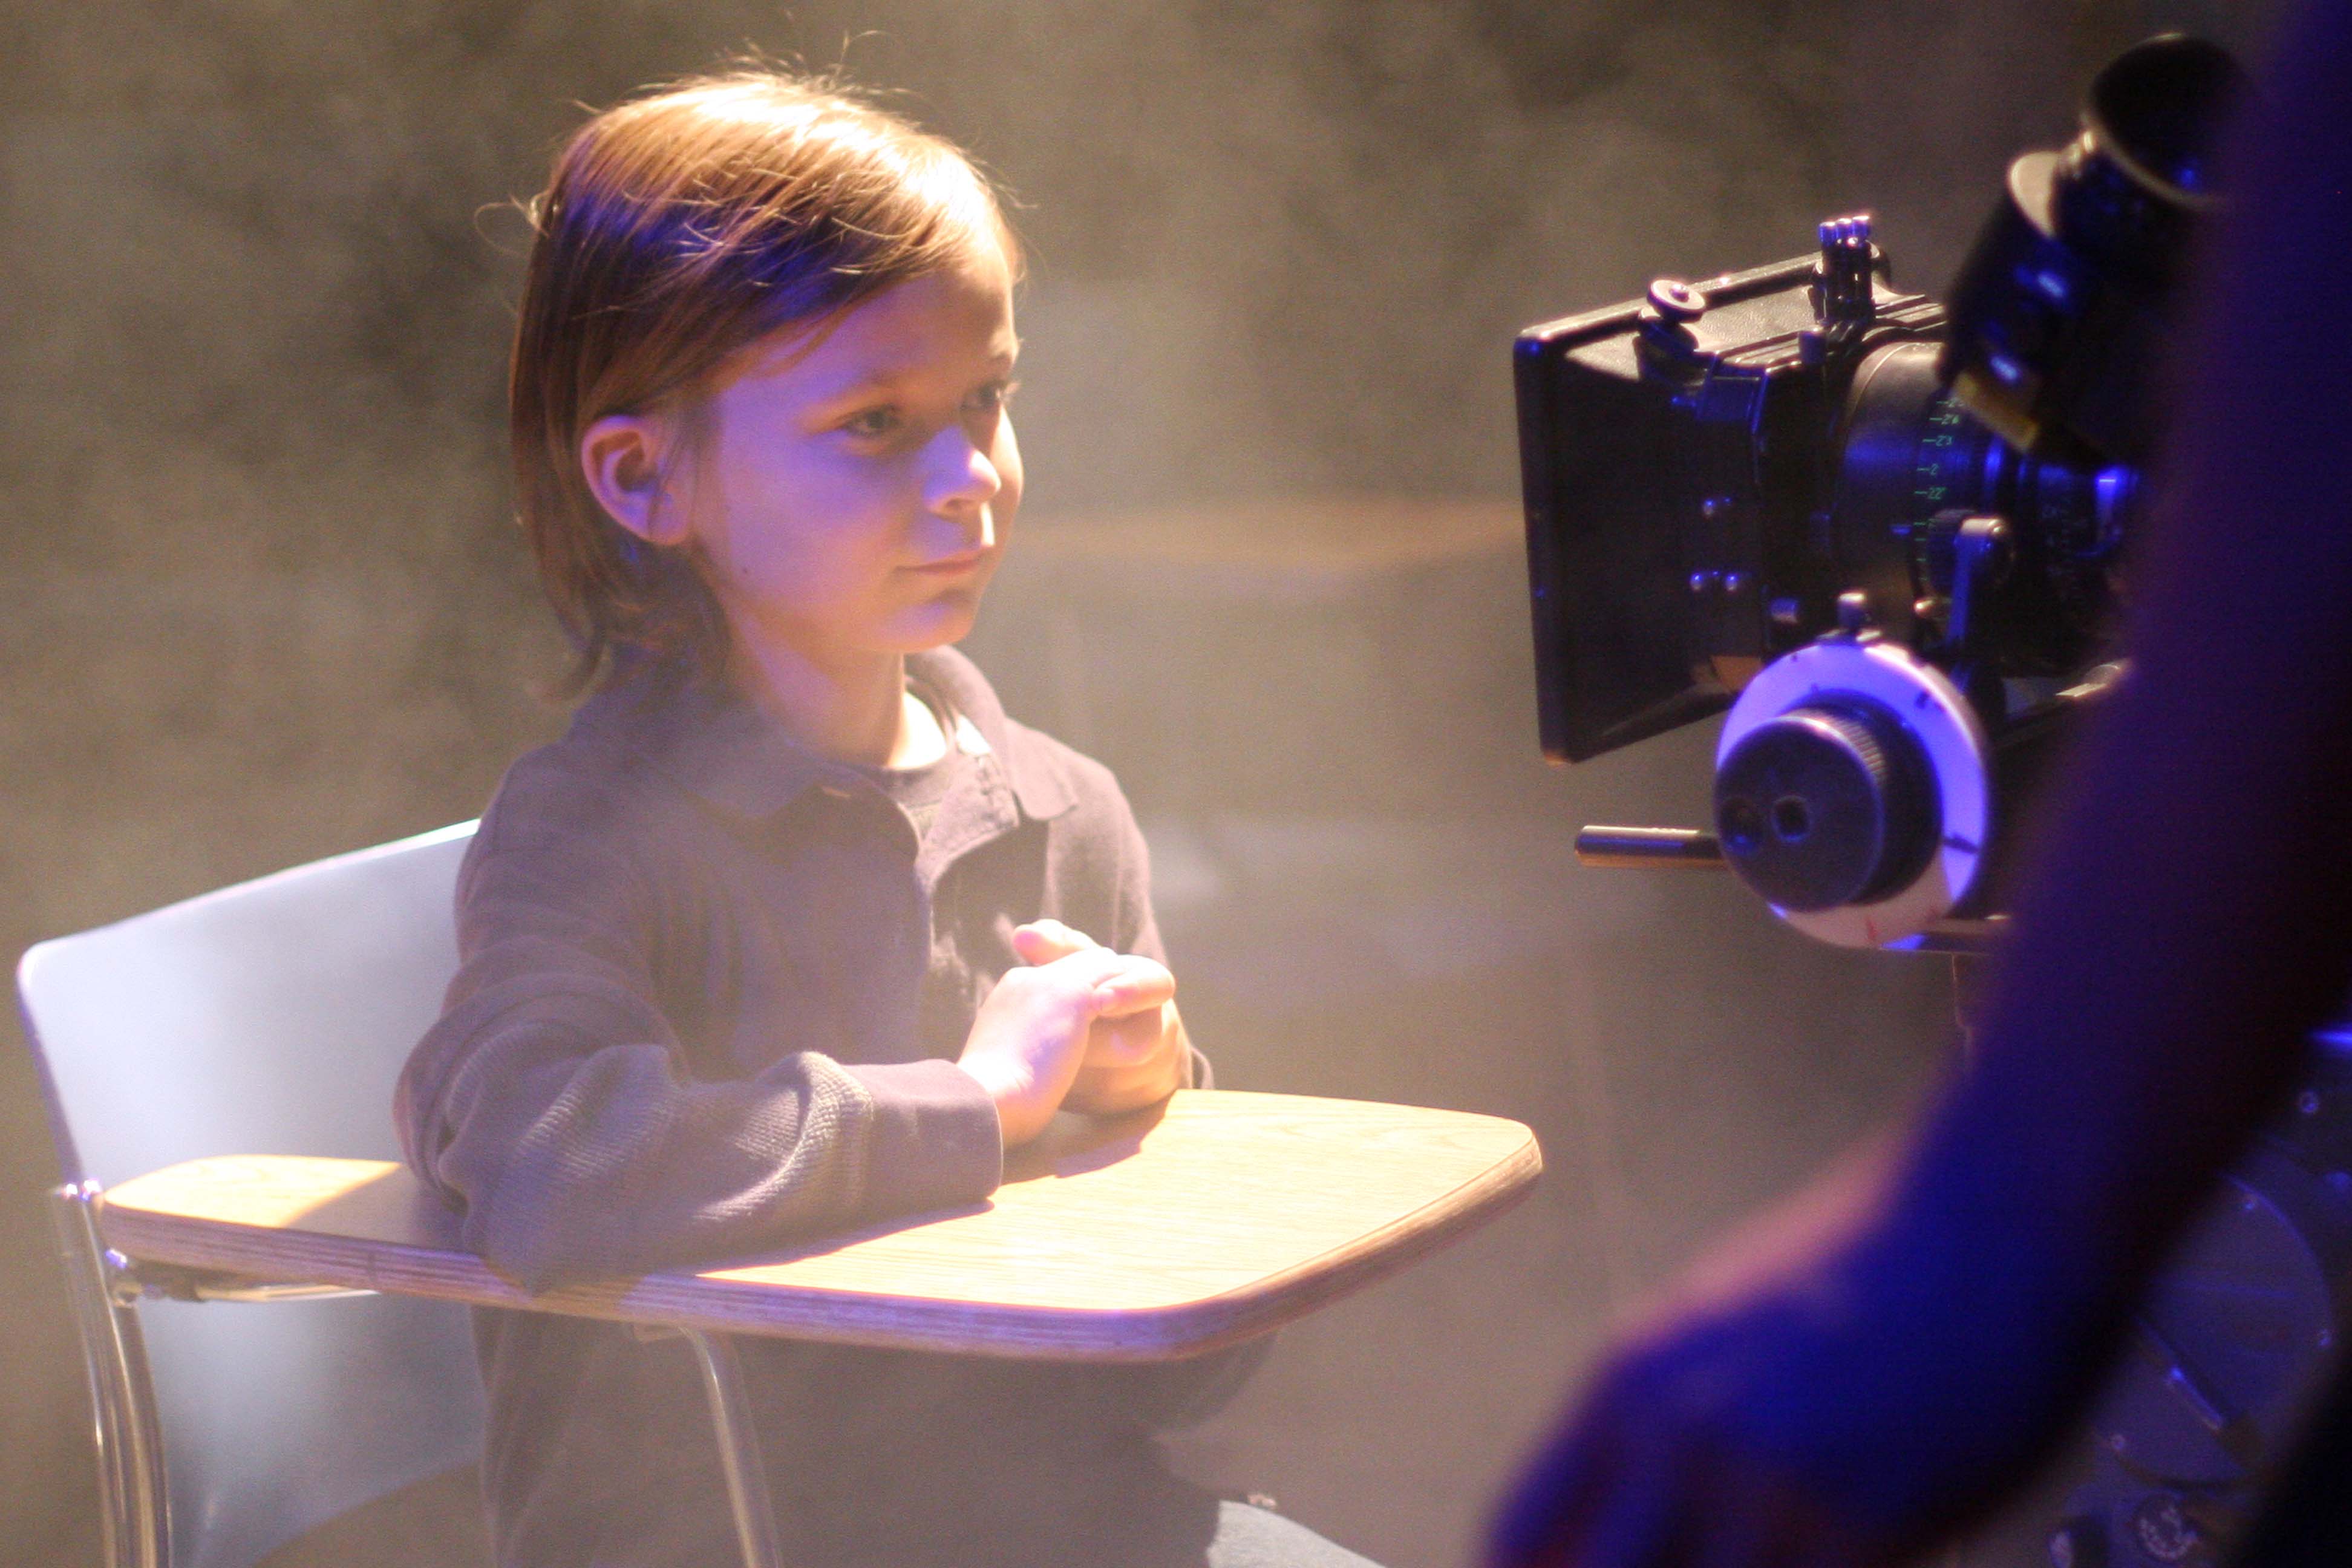 Mikey Effie on the set of BUILDING BLOCKS.